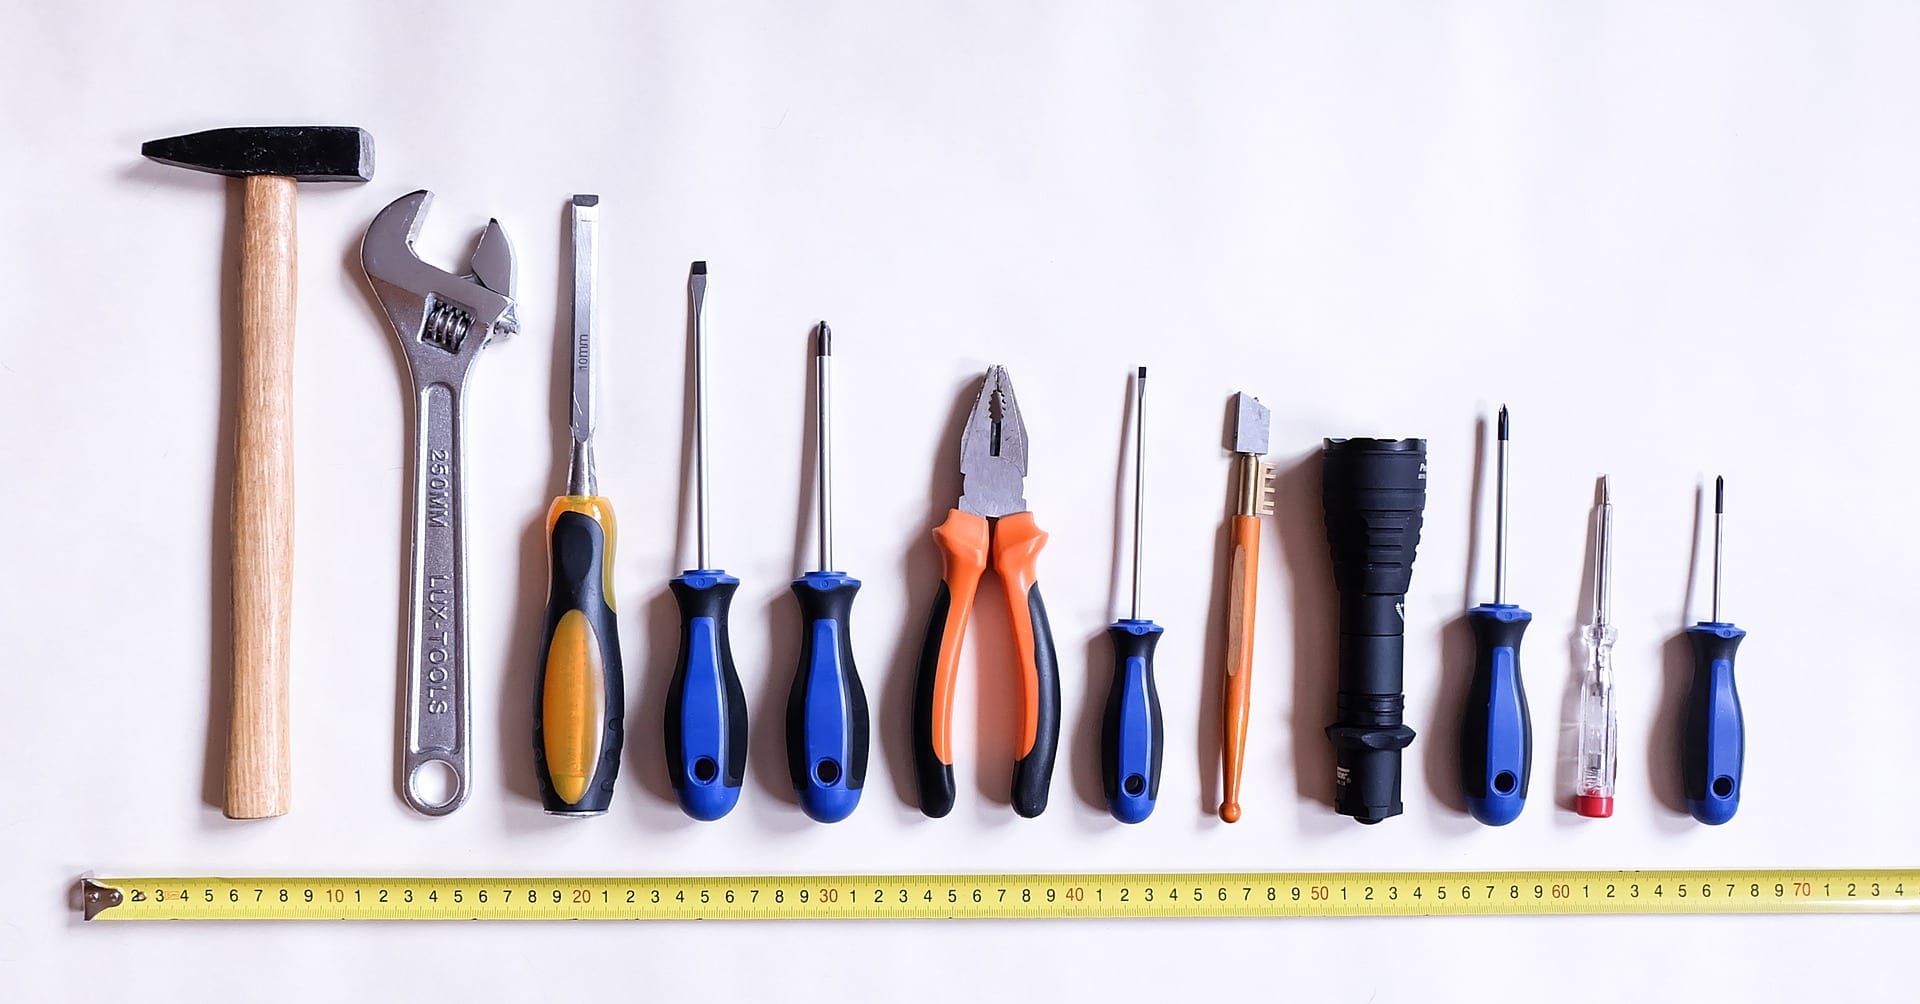 tools lined up on white background with a tape measurer underneath